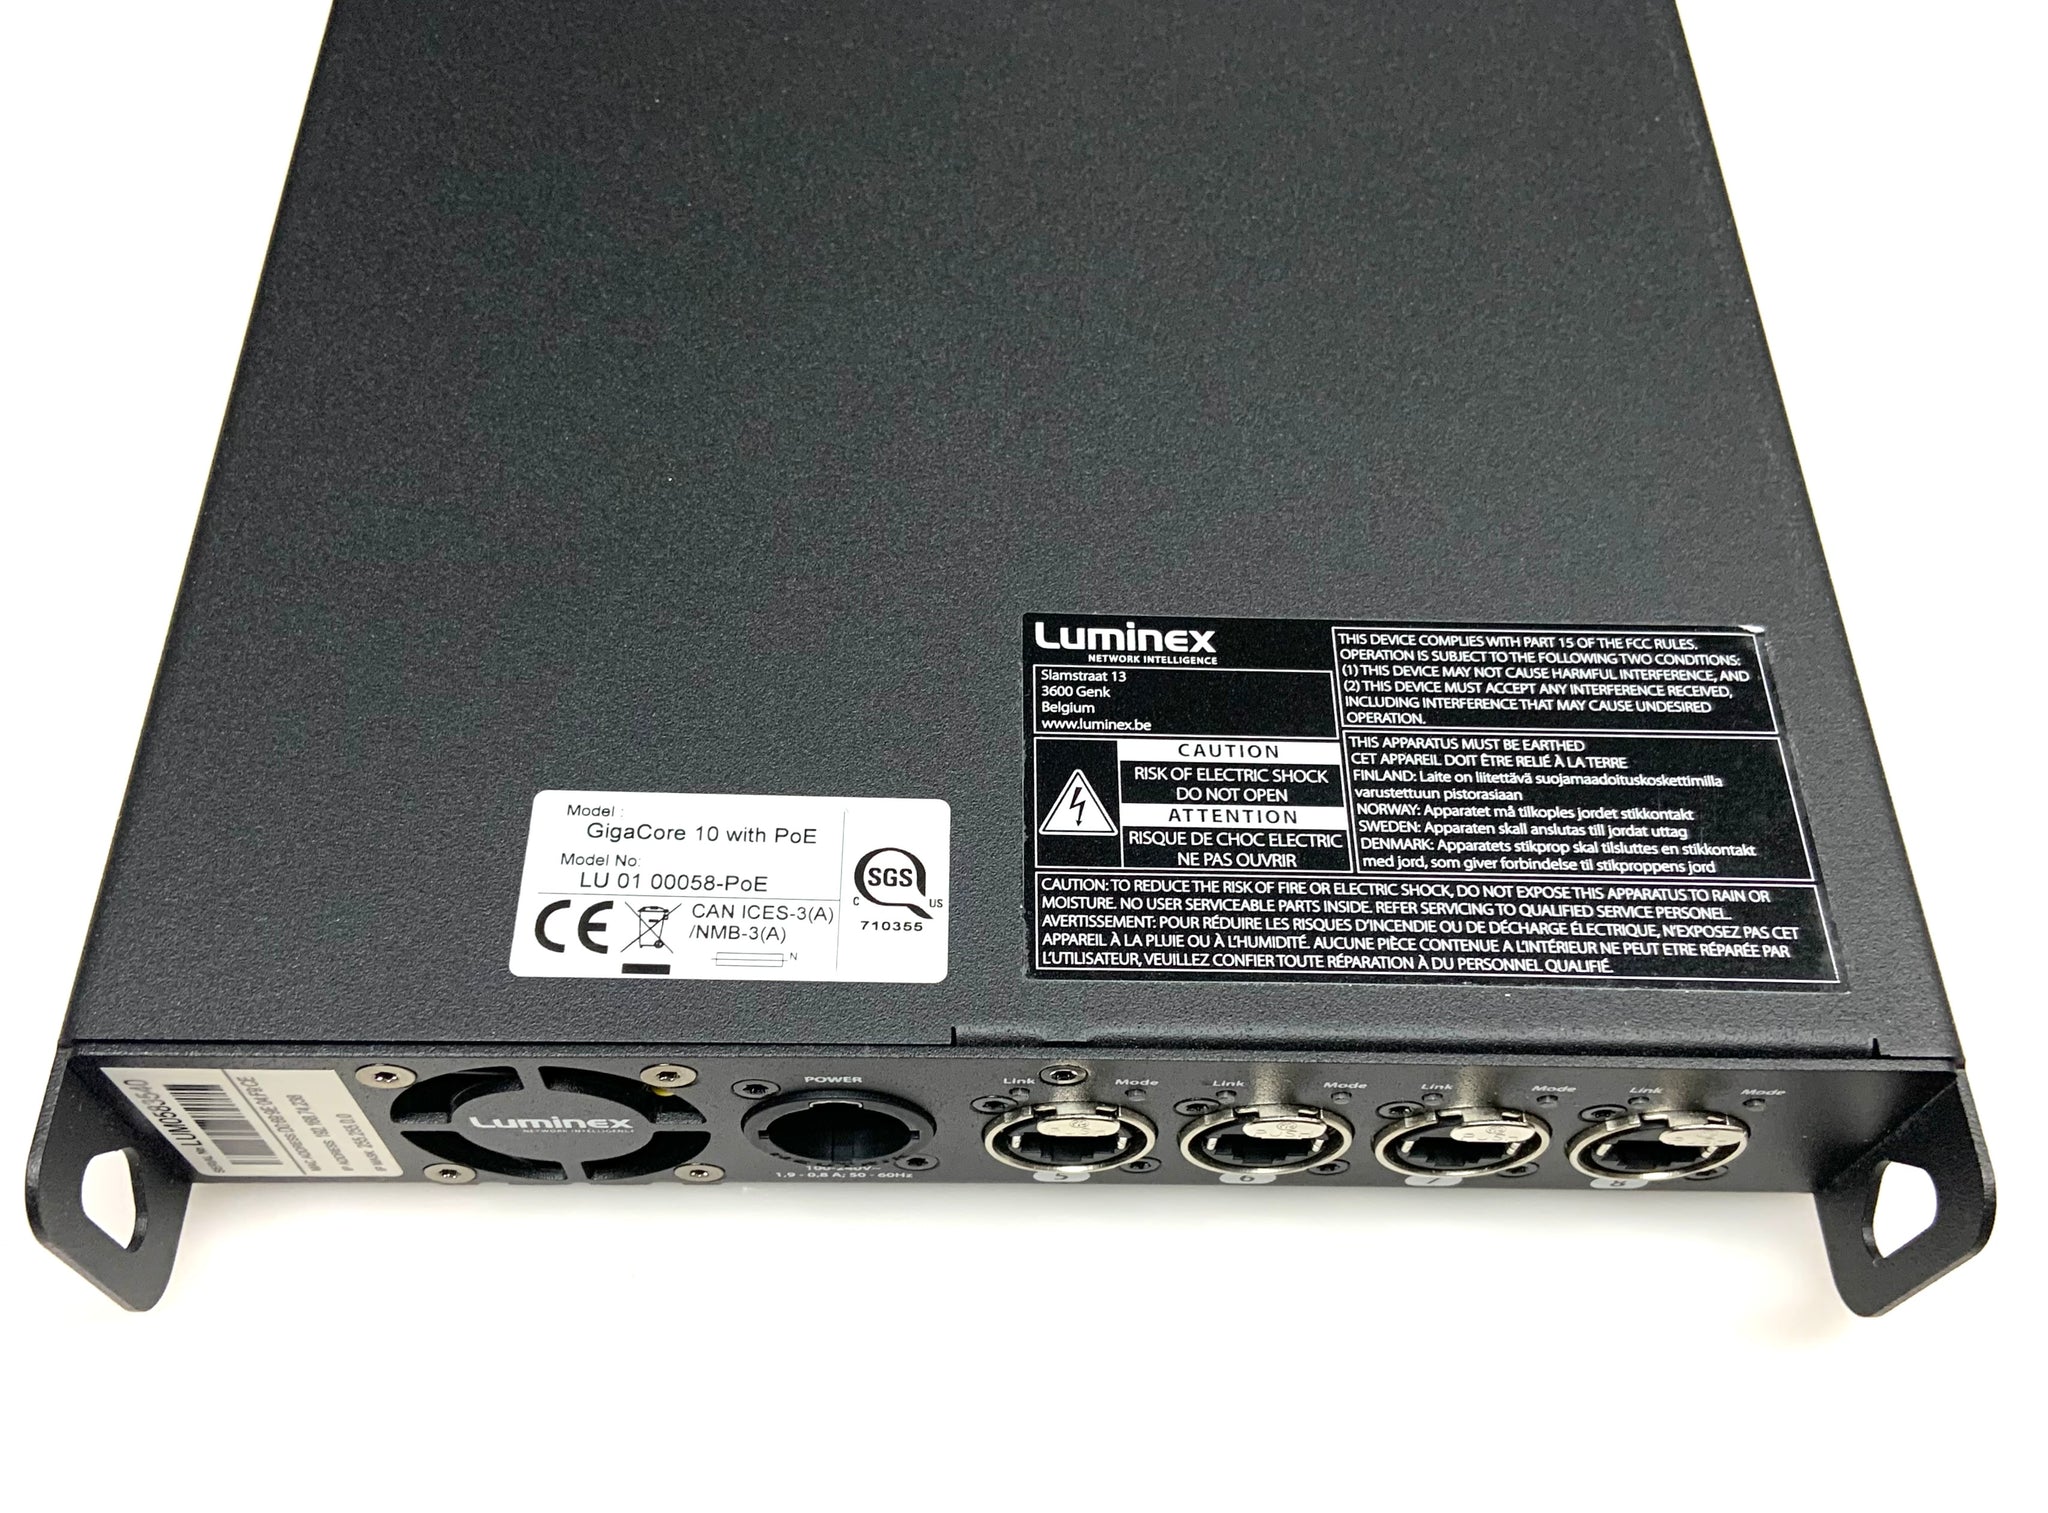 Luminex LMX-GC-10-POENDS 10 POE NDS Ethernet Switch with Neutrik